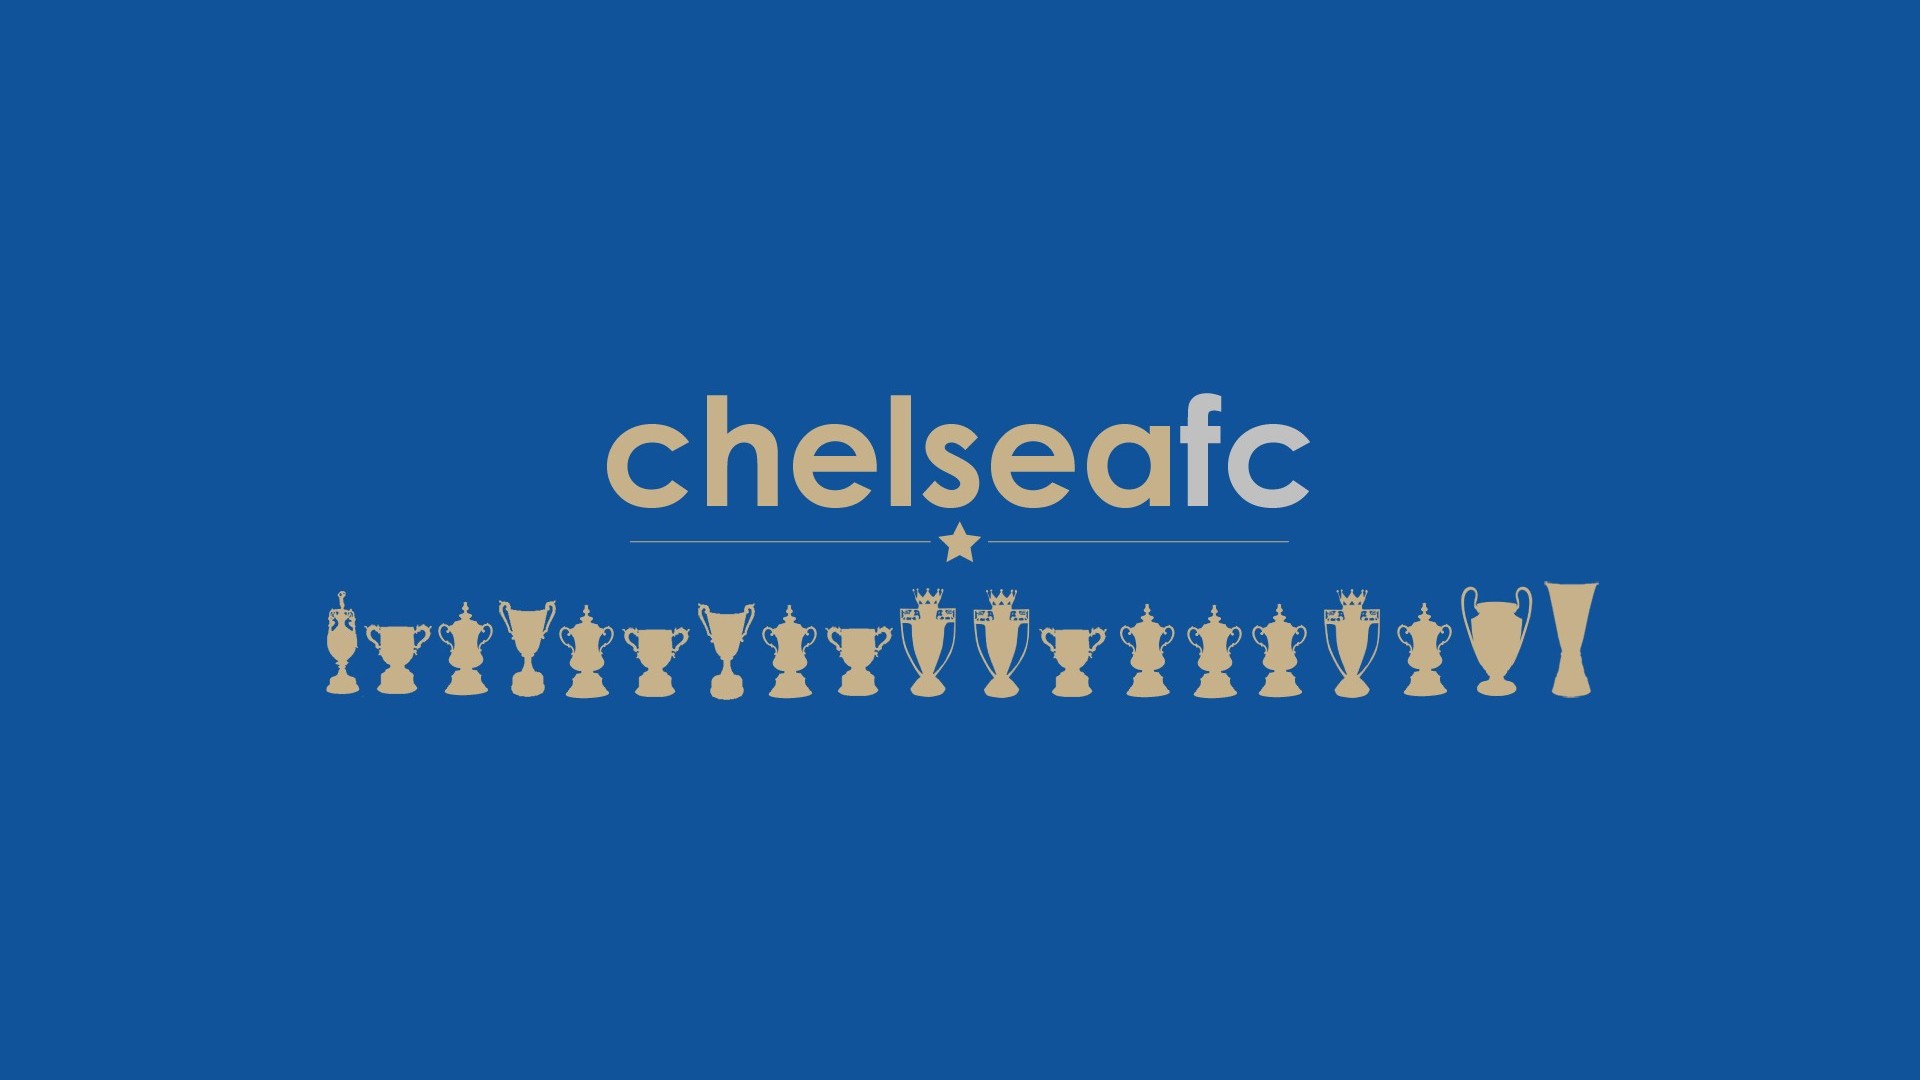 Chelsea For PC Wallpaper with high-resolution 1920x1080 pixel. You can use this wallpaper for your Desktop Computers, Mac Screensavers, Windows Backgrounds, iPhone Wallpapers, Tablet or Android Lock screen and another Mobile device